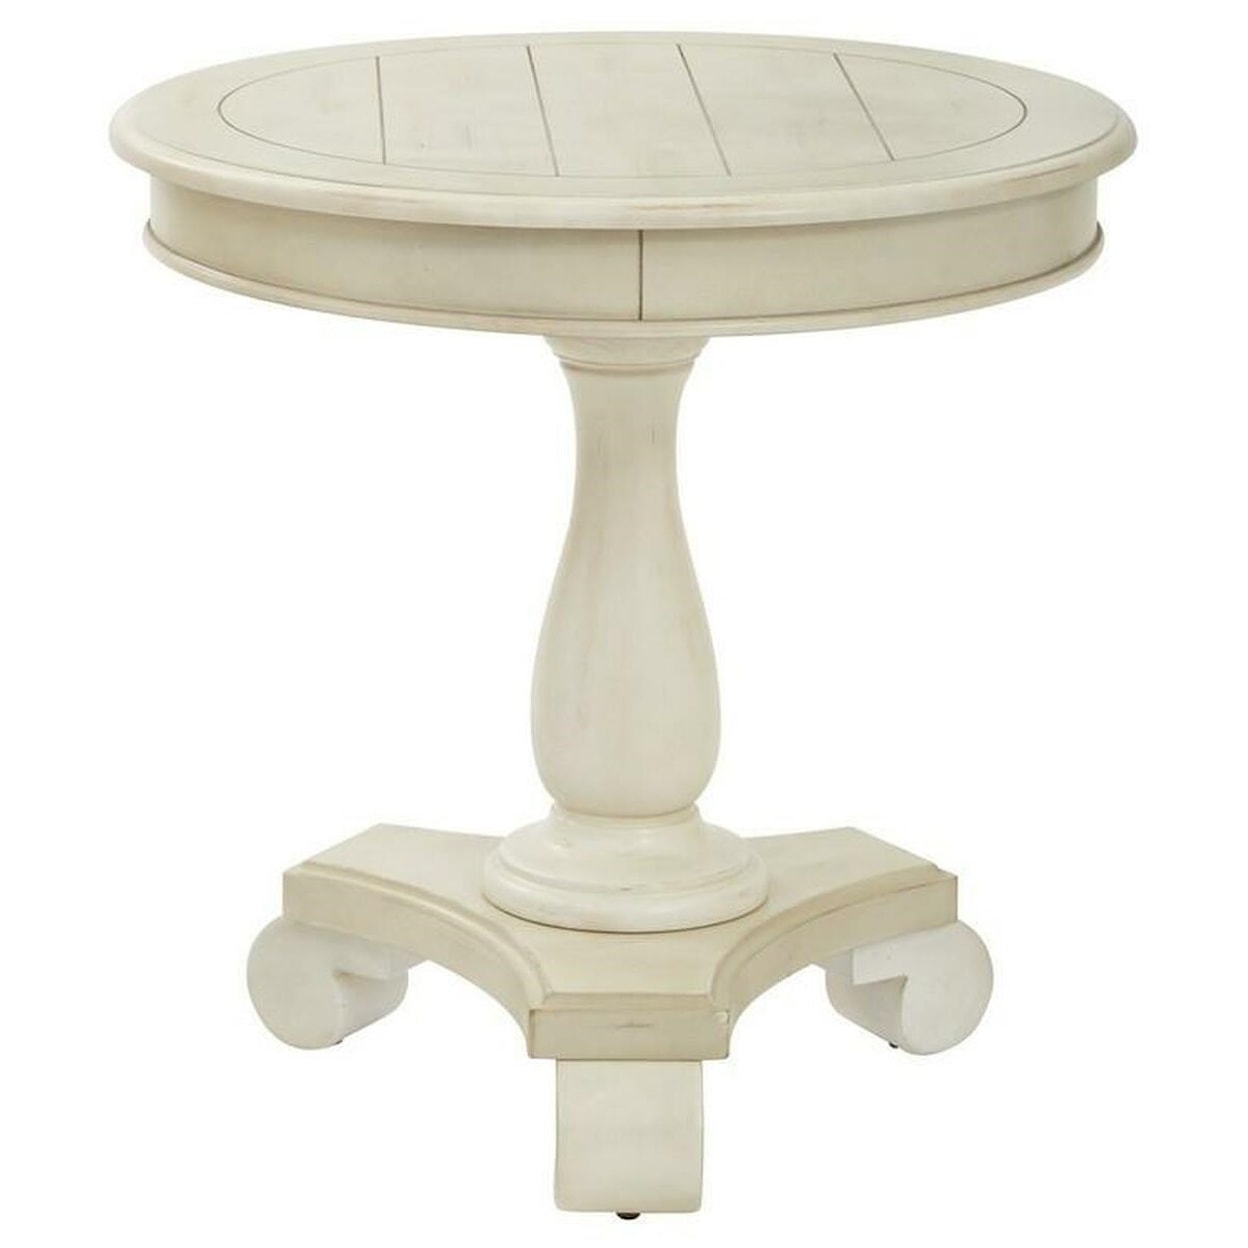 Office Star Avalon Accents Avalon Round Accent Table